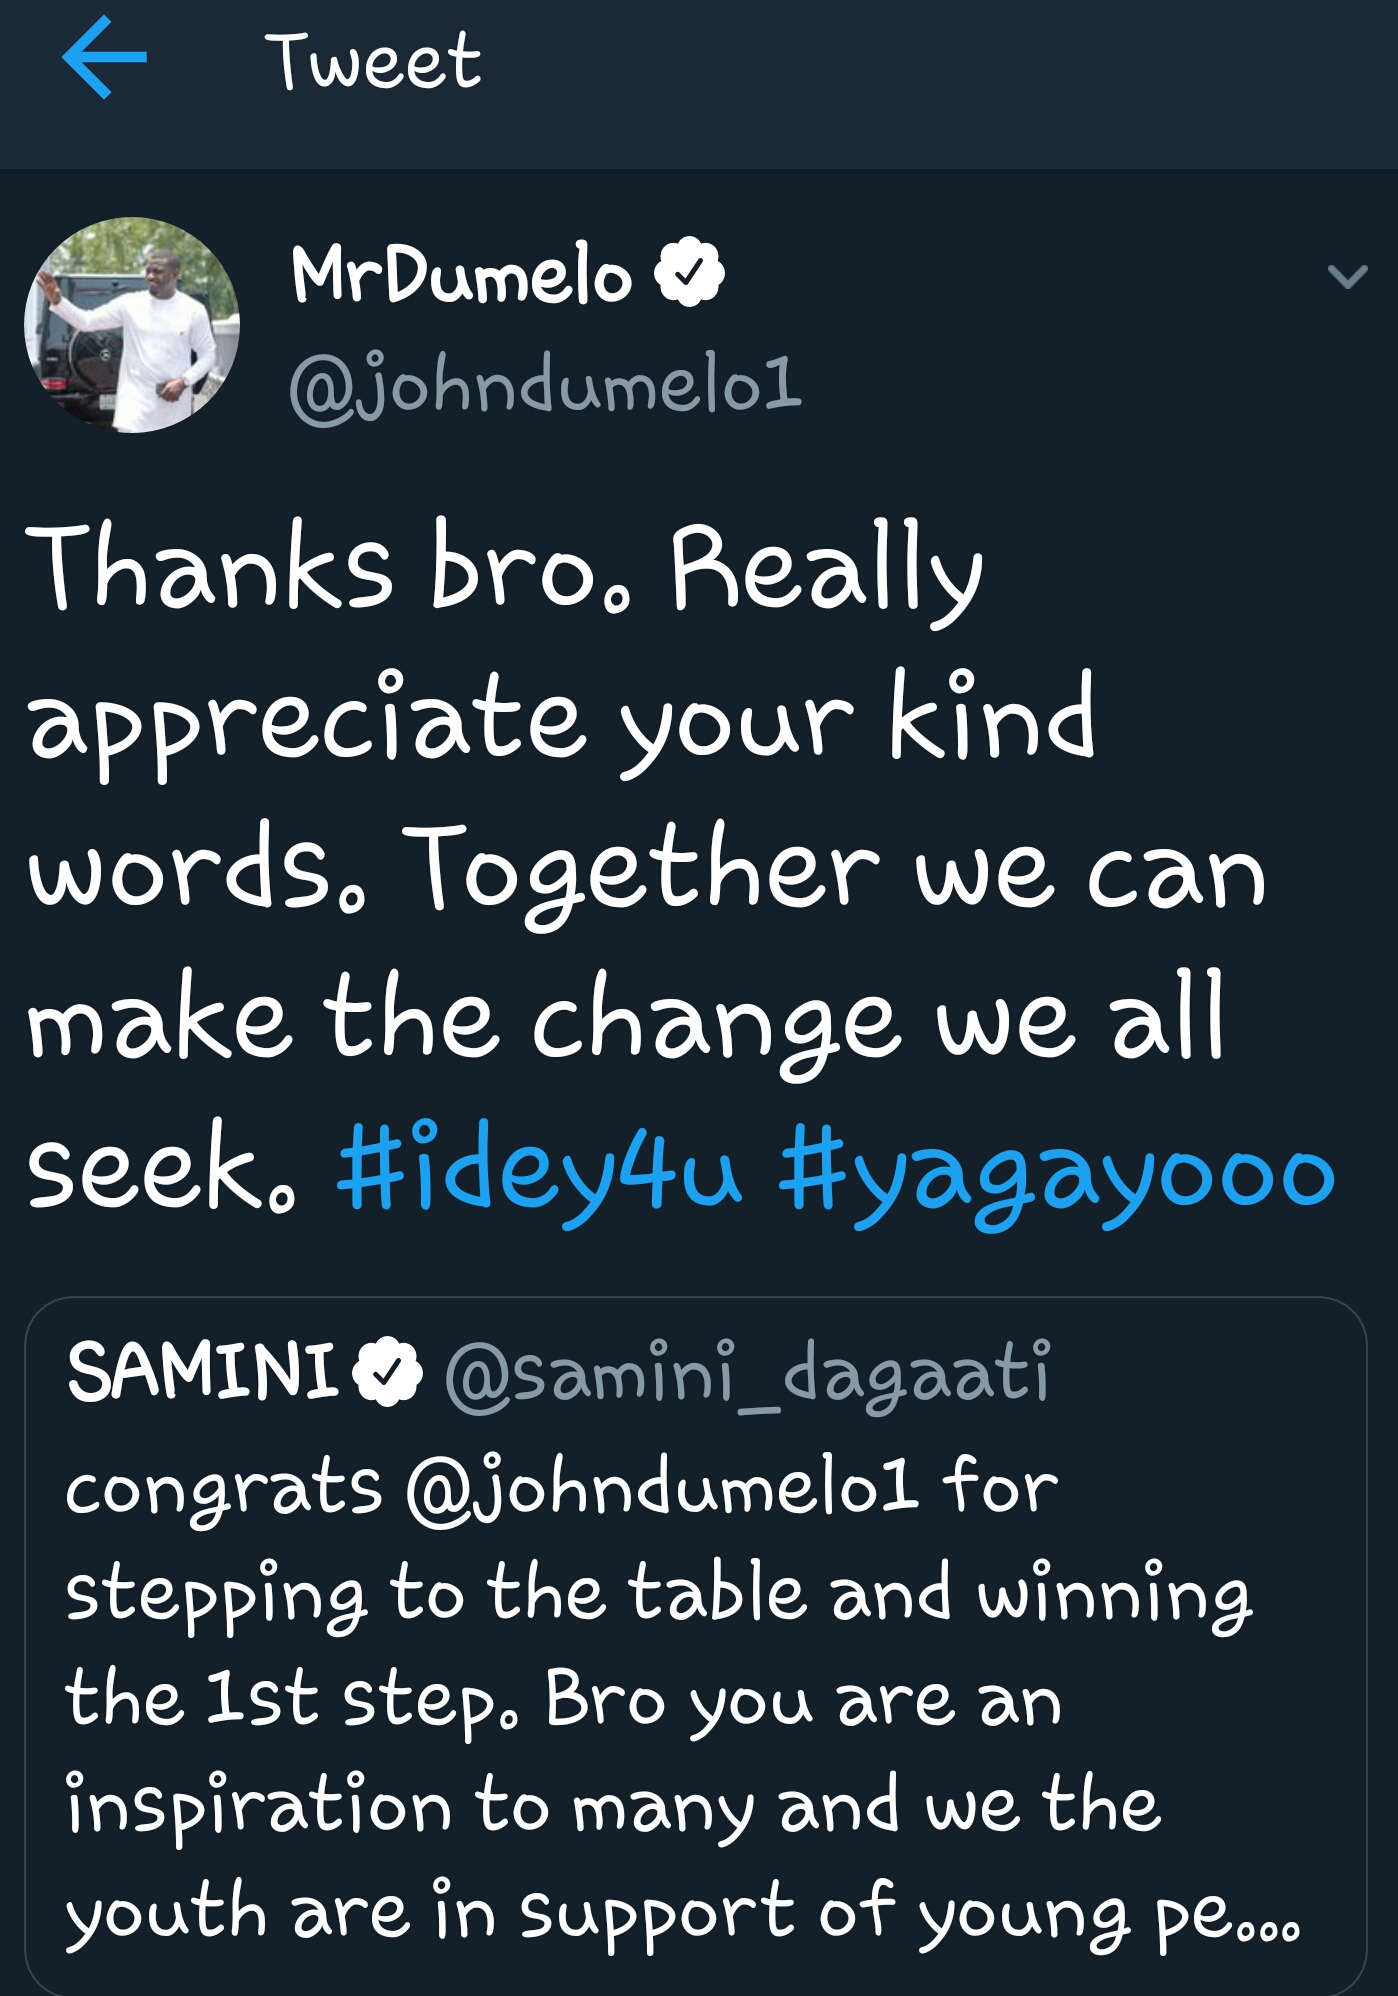 Samini congratulates John Dumelo and urges him to be a positive difference